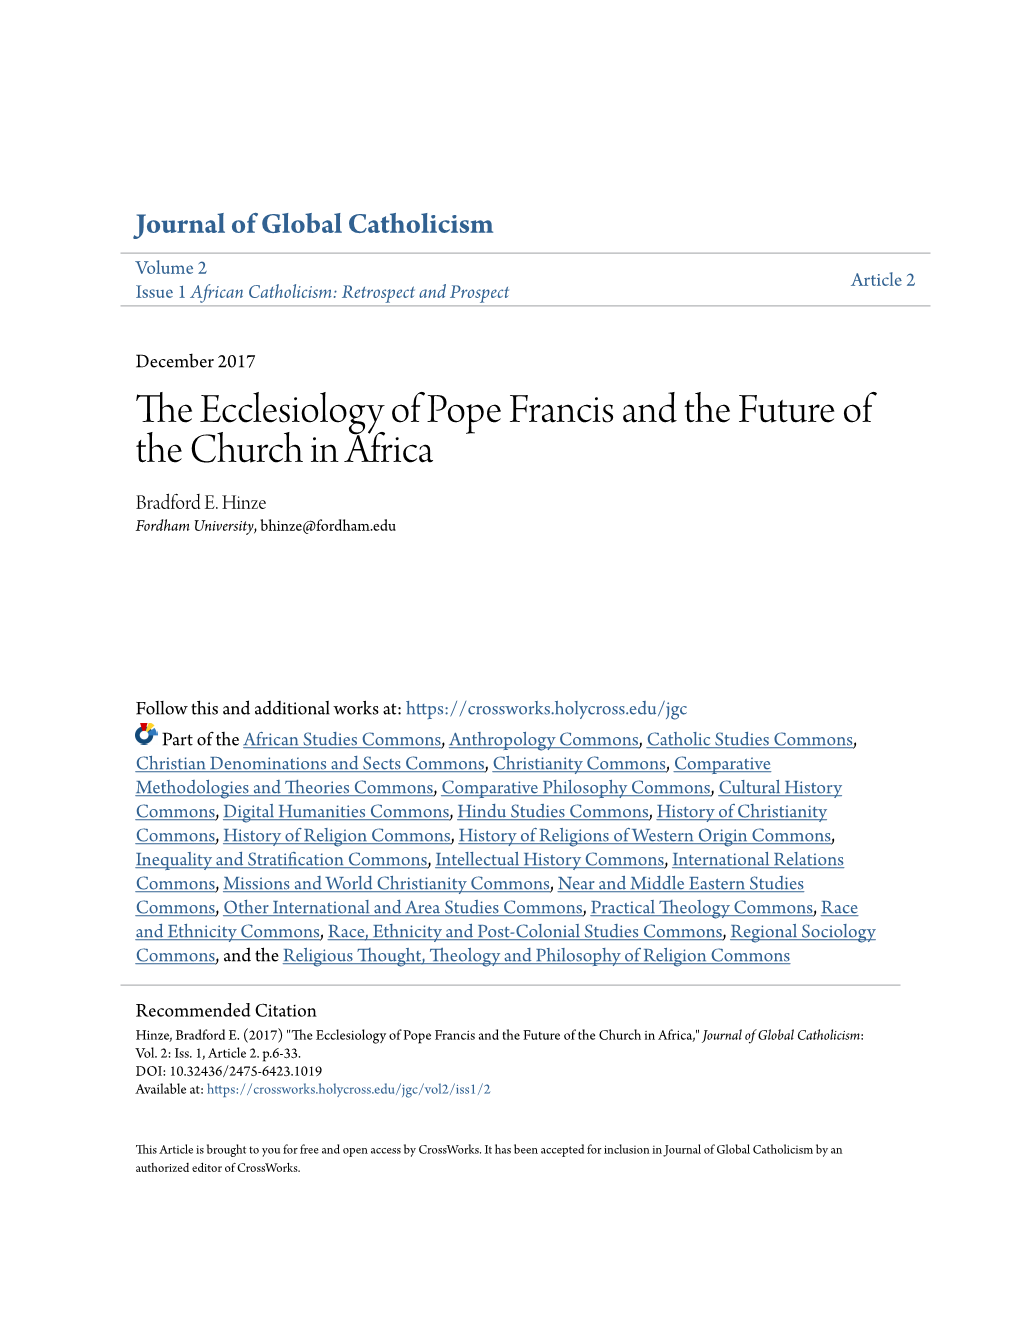 The Ecclesiology of Pope Francis and the Future of the Church in Africa